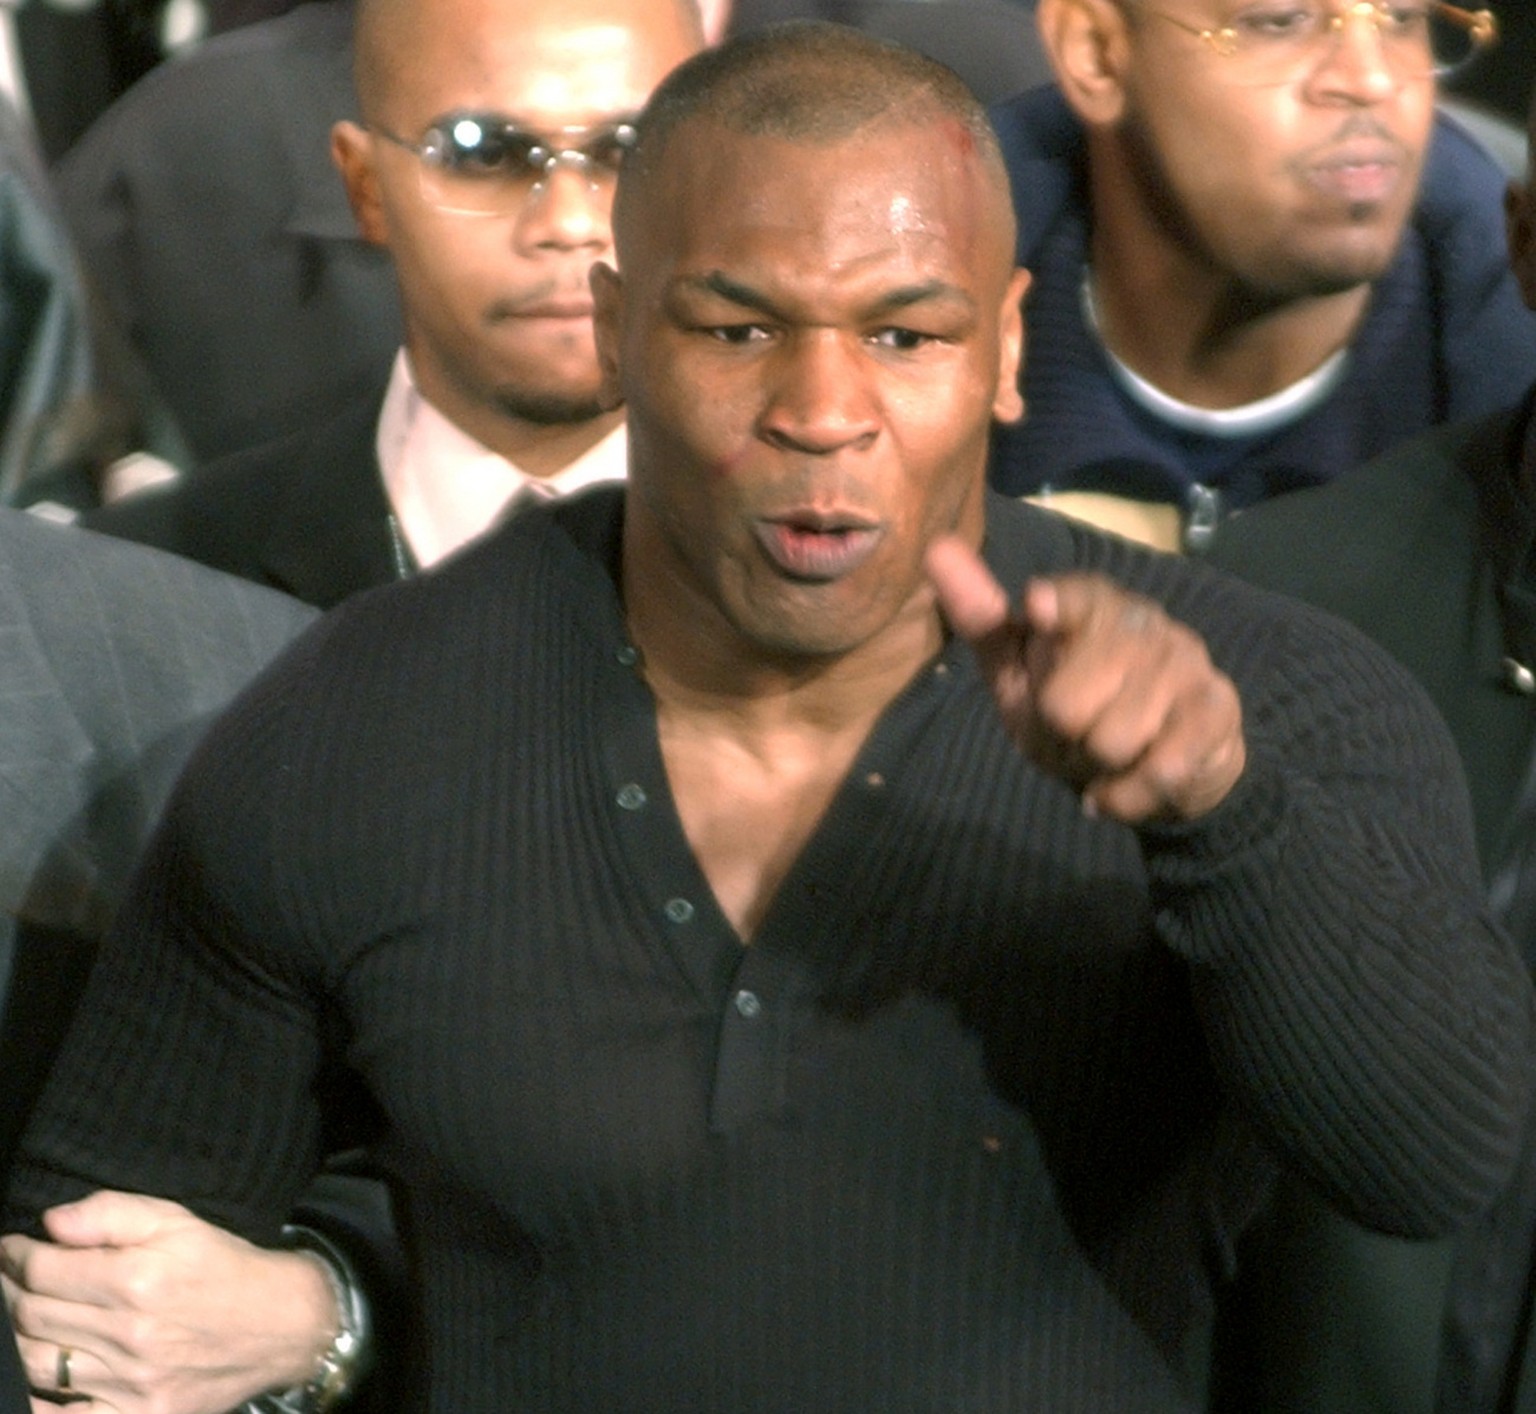 Boxer Mike Tyson threatens members of the media after a brawl broke out on stage during a press conference announcing an upcoming April 6 fight between heavyweight champion Lennox Lewis and Tyson in t ...